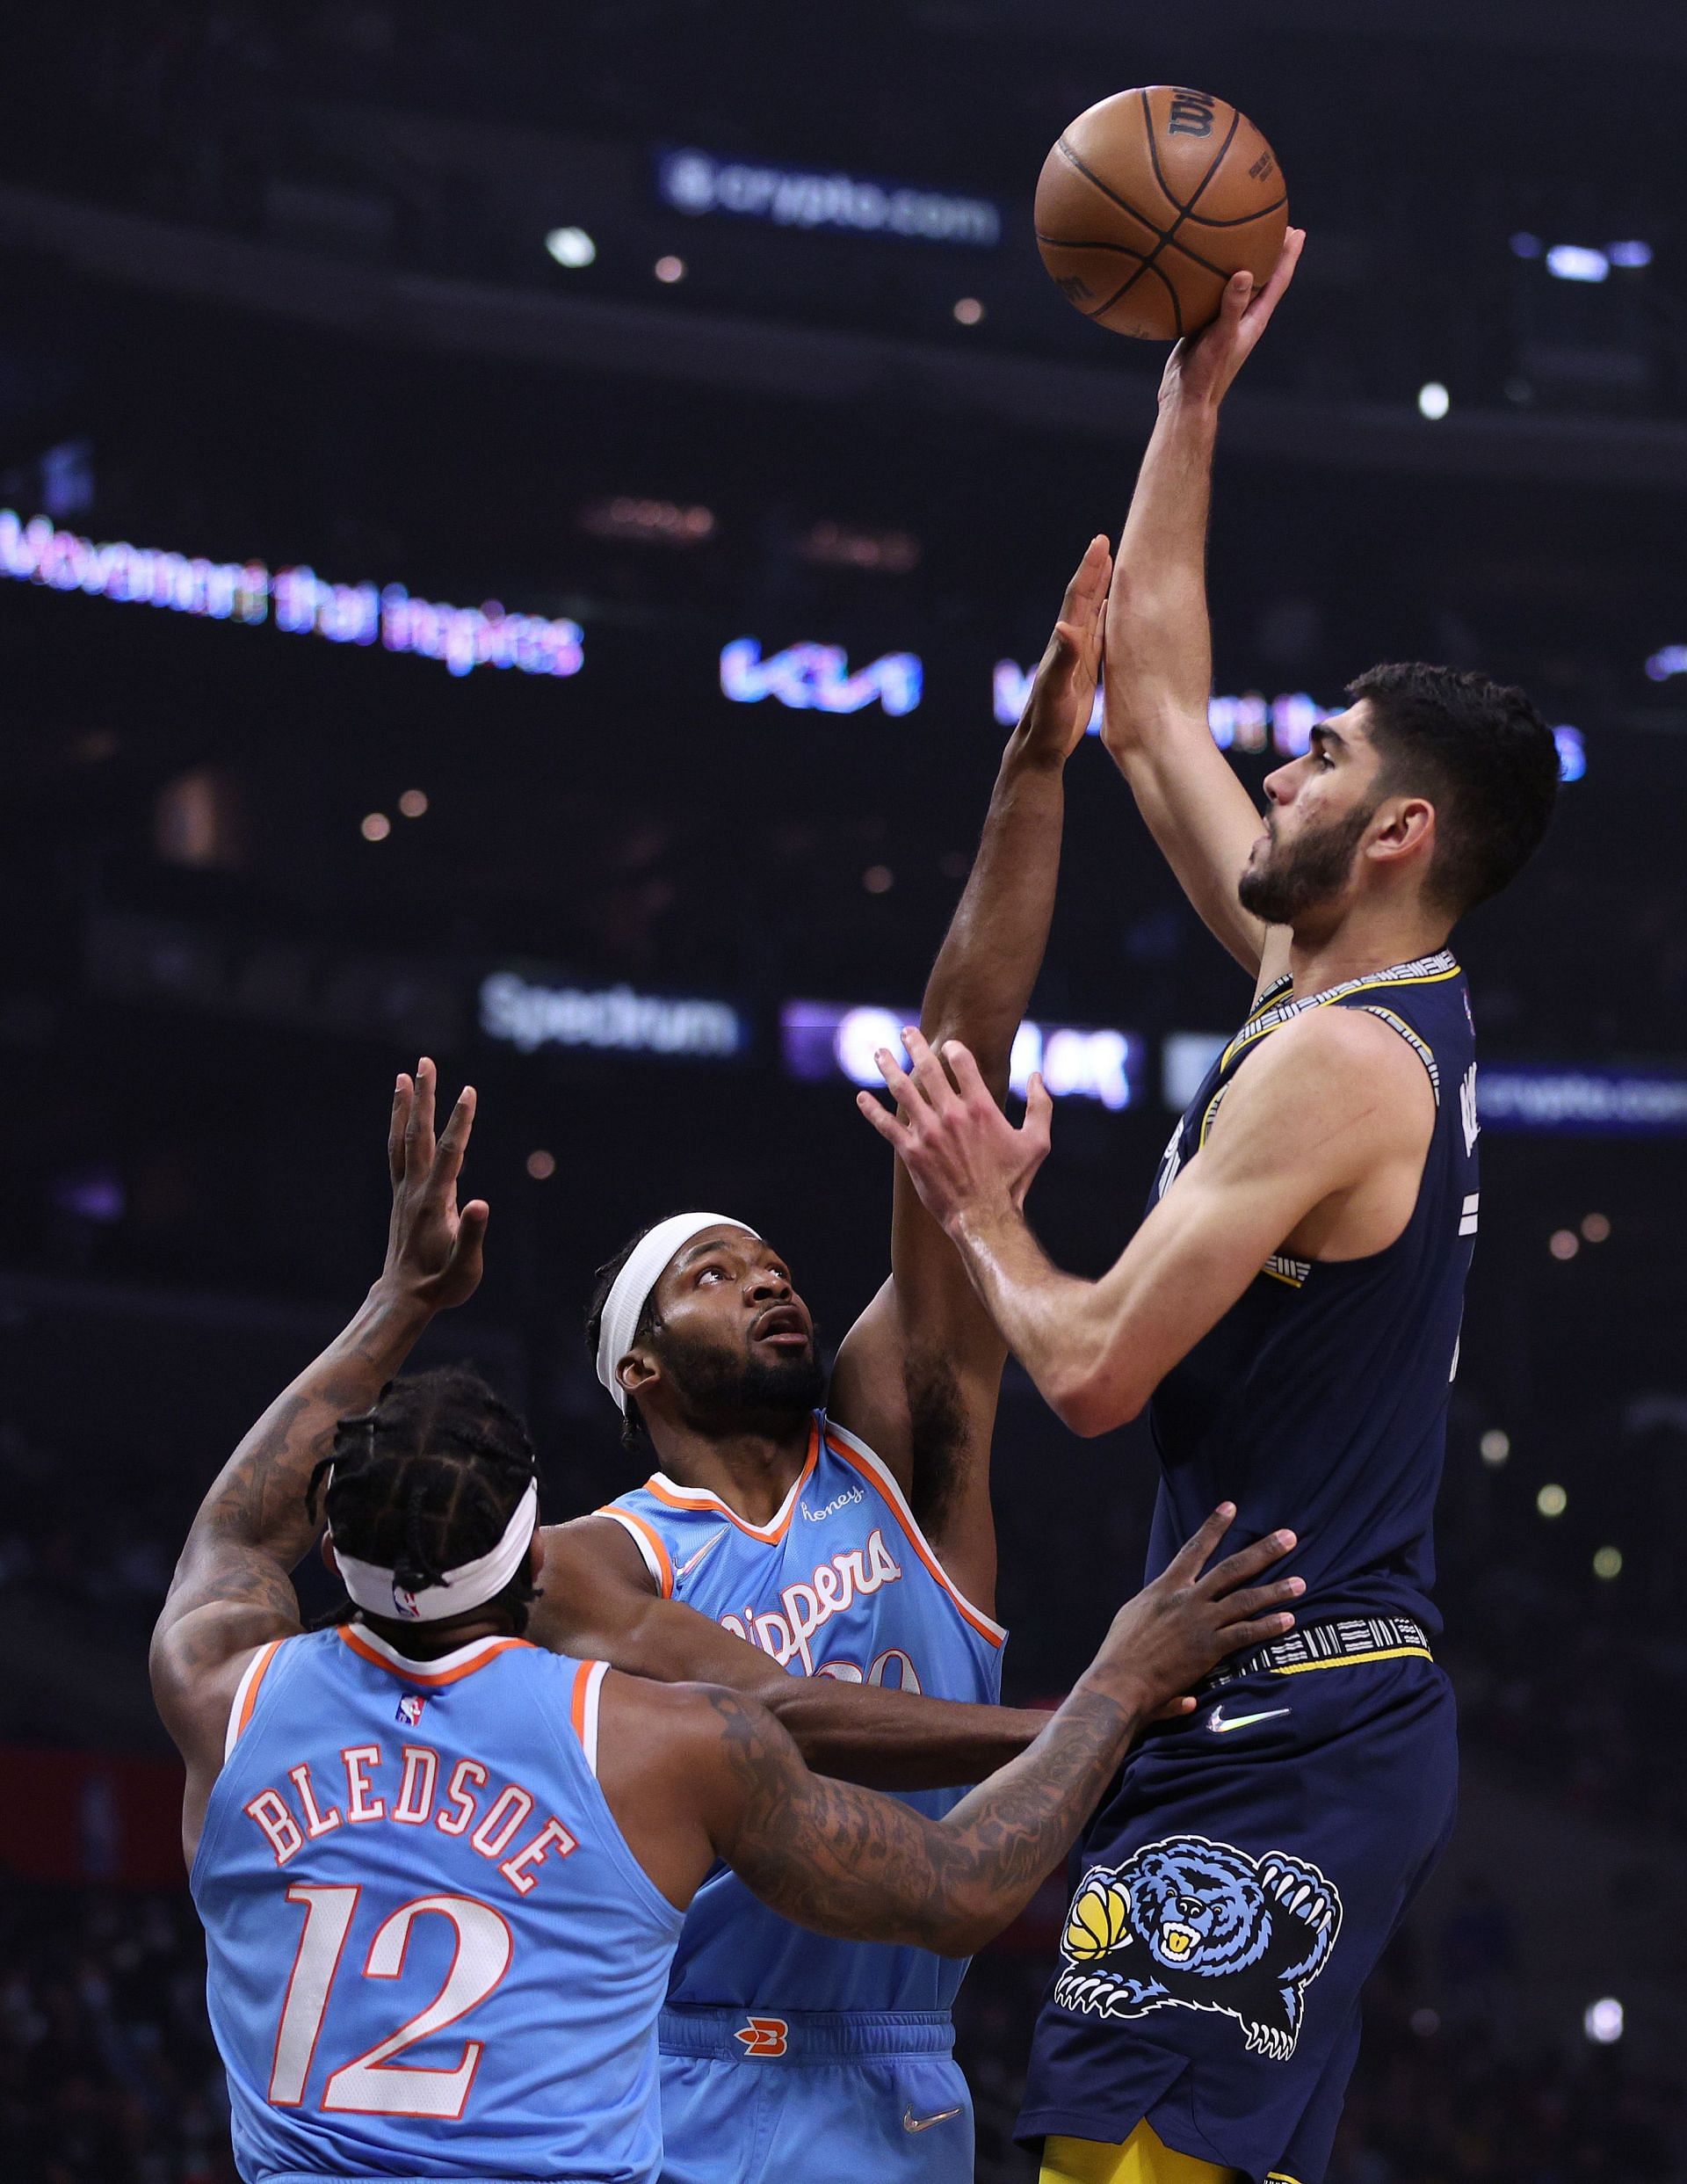 Aldama has a lot of potential and could be the next star for the Grizzlies (Image via Getty Images)